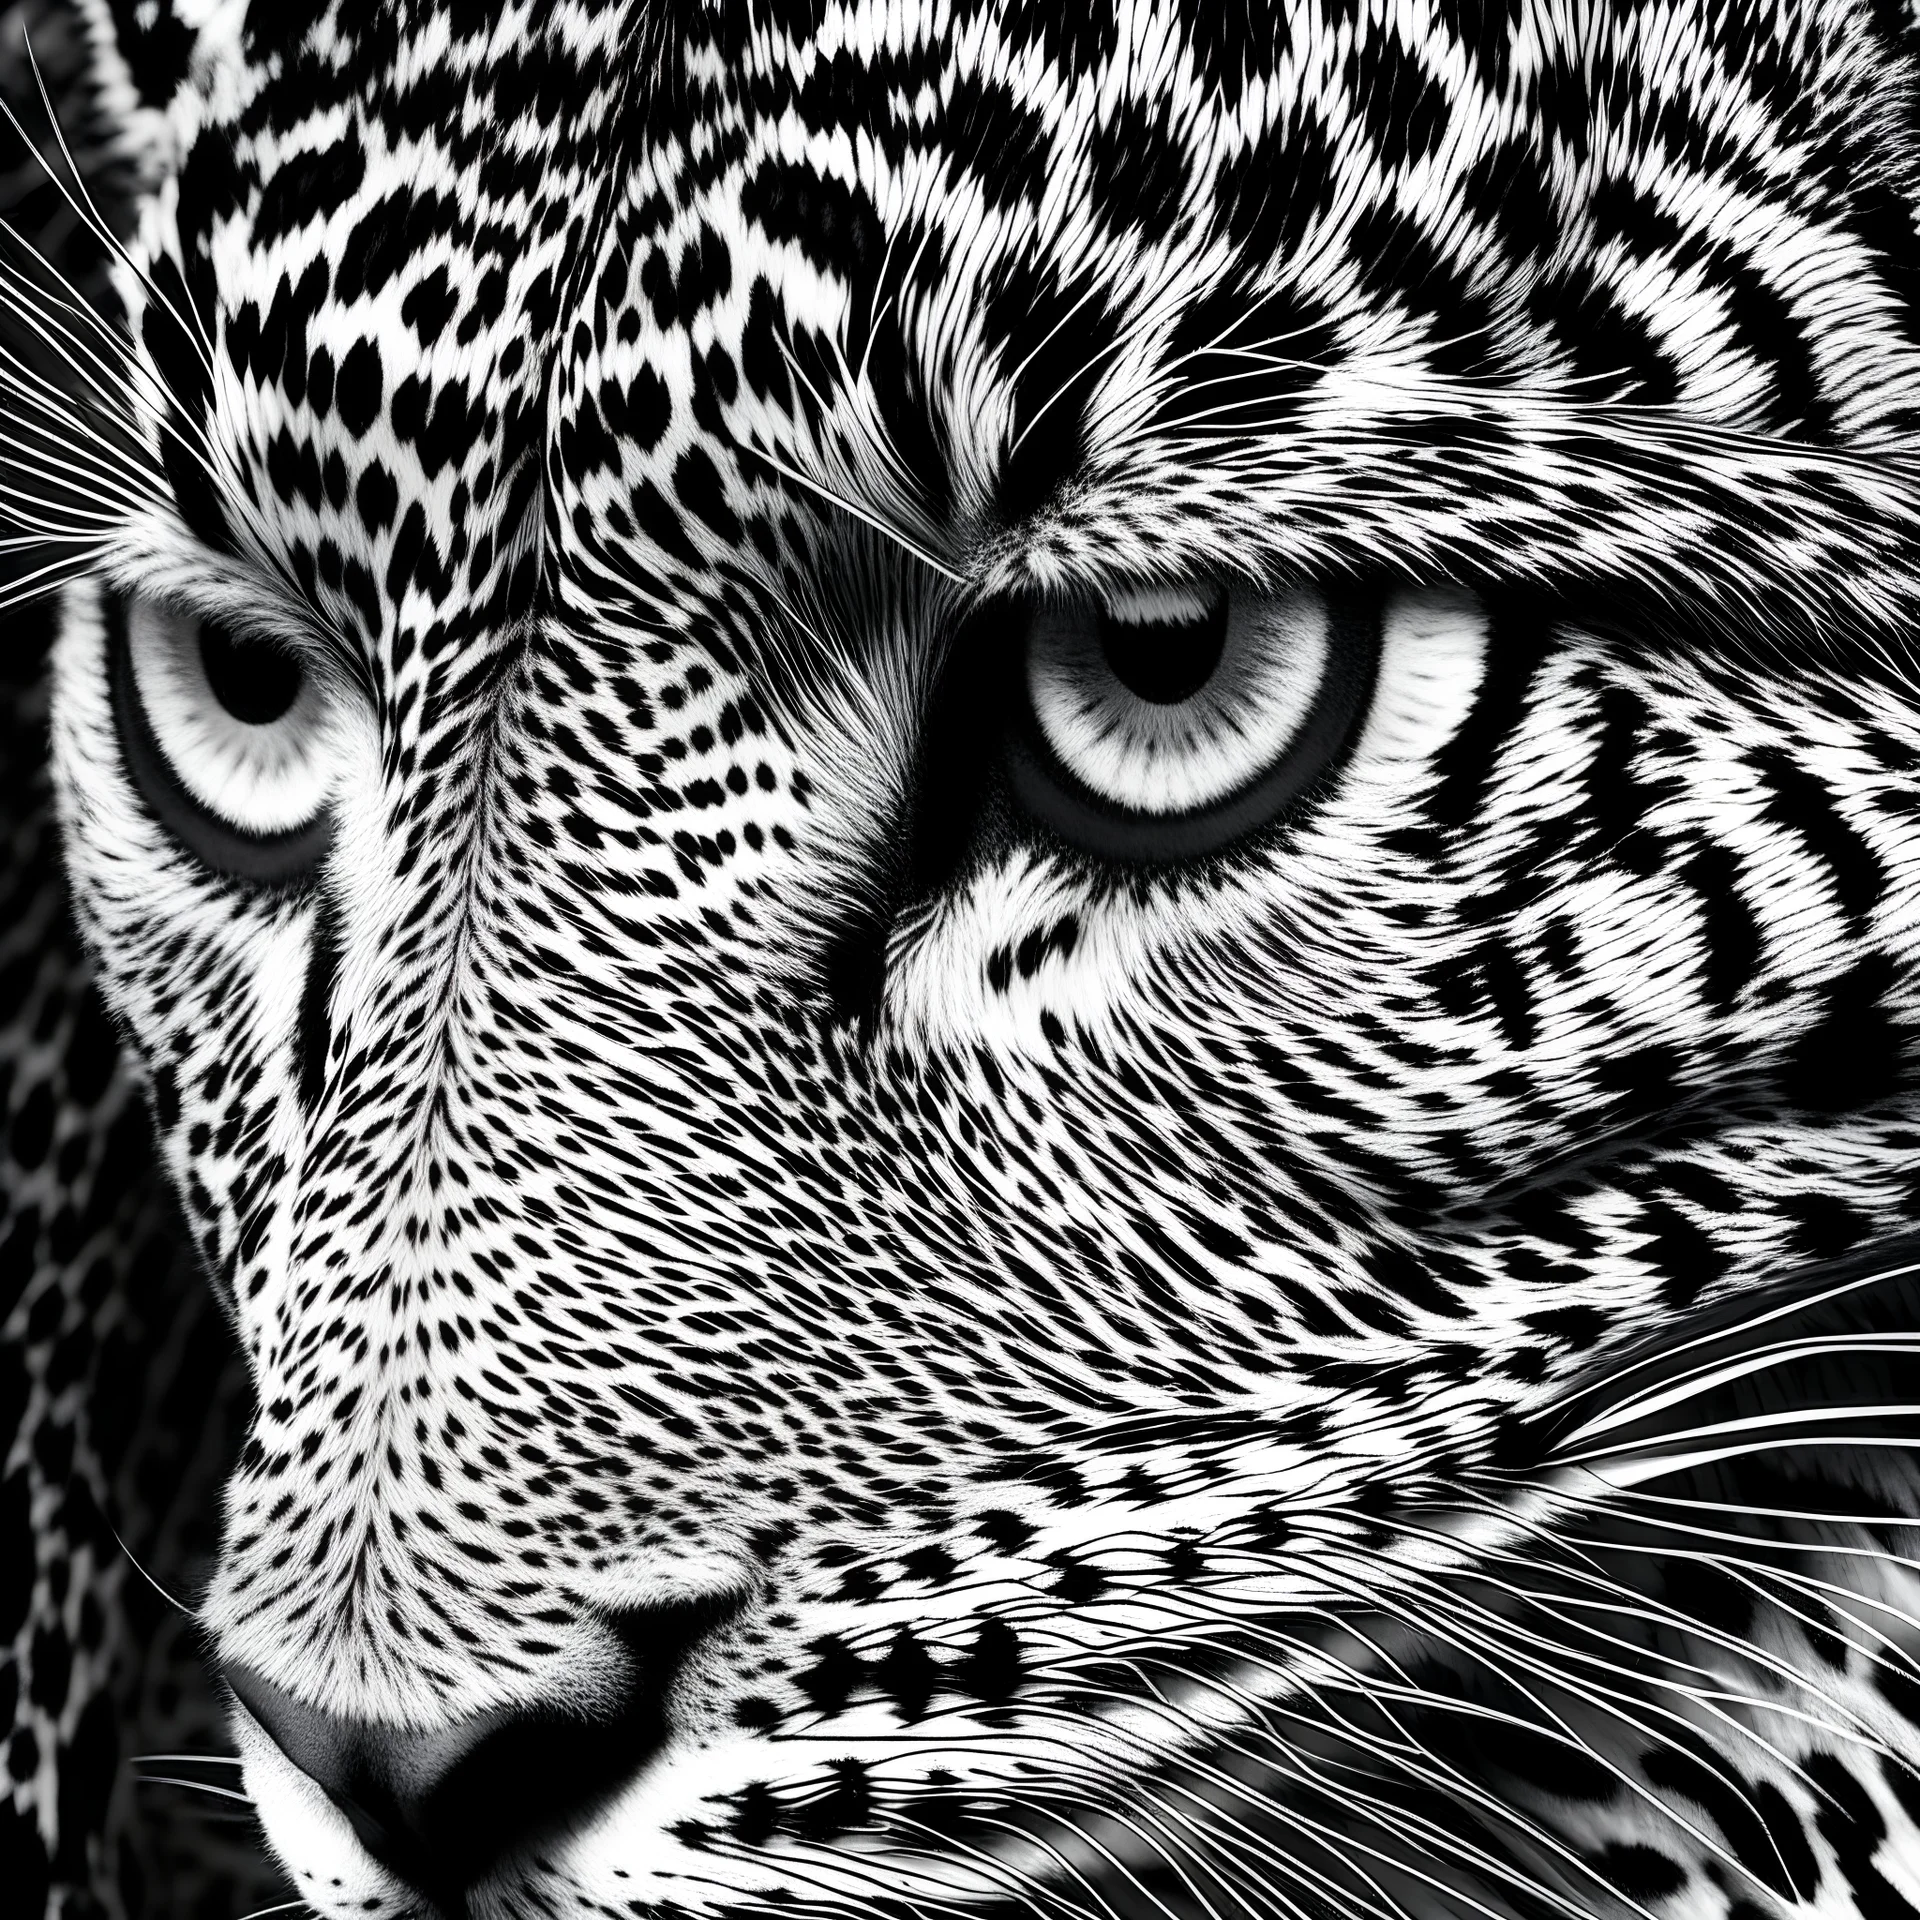 B&W animal infinity pattern, real, texture,fashion, not animal, no face,